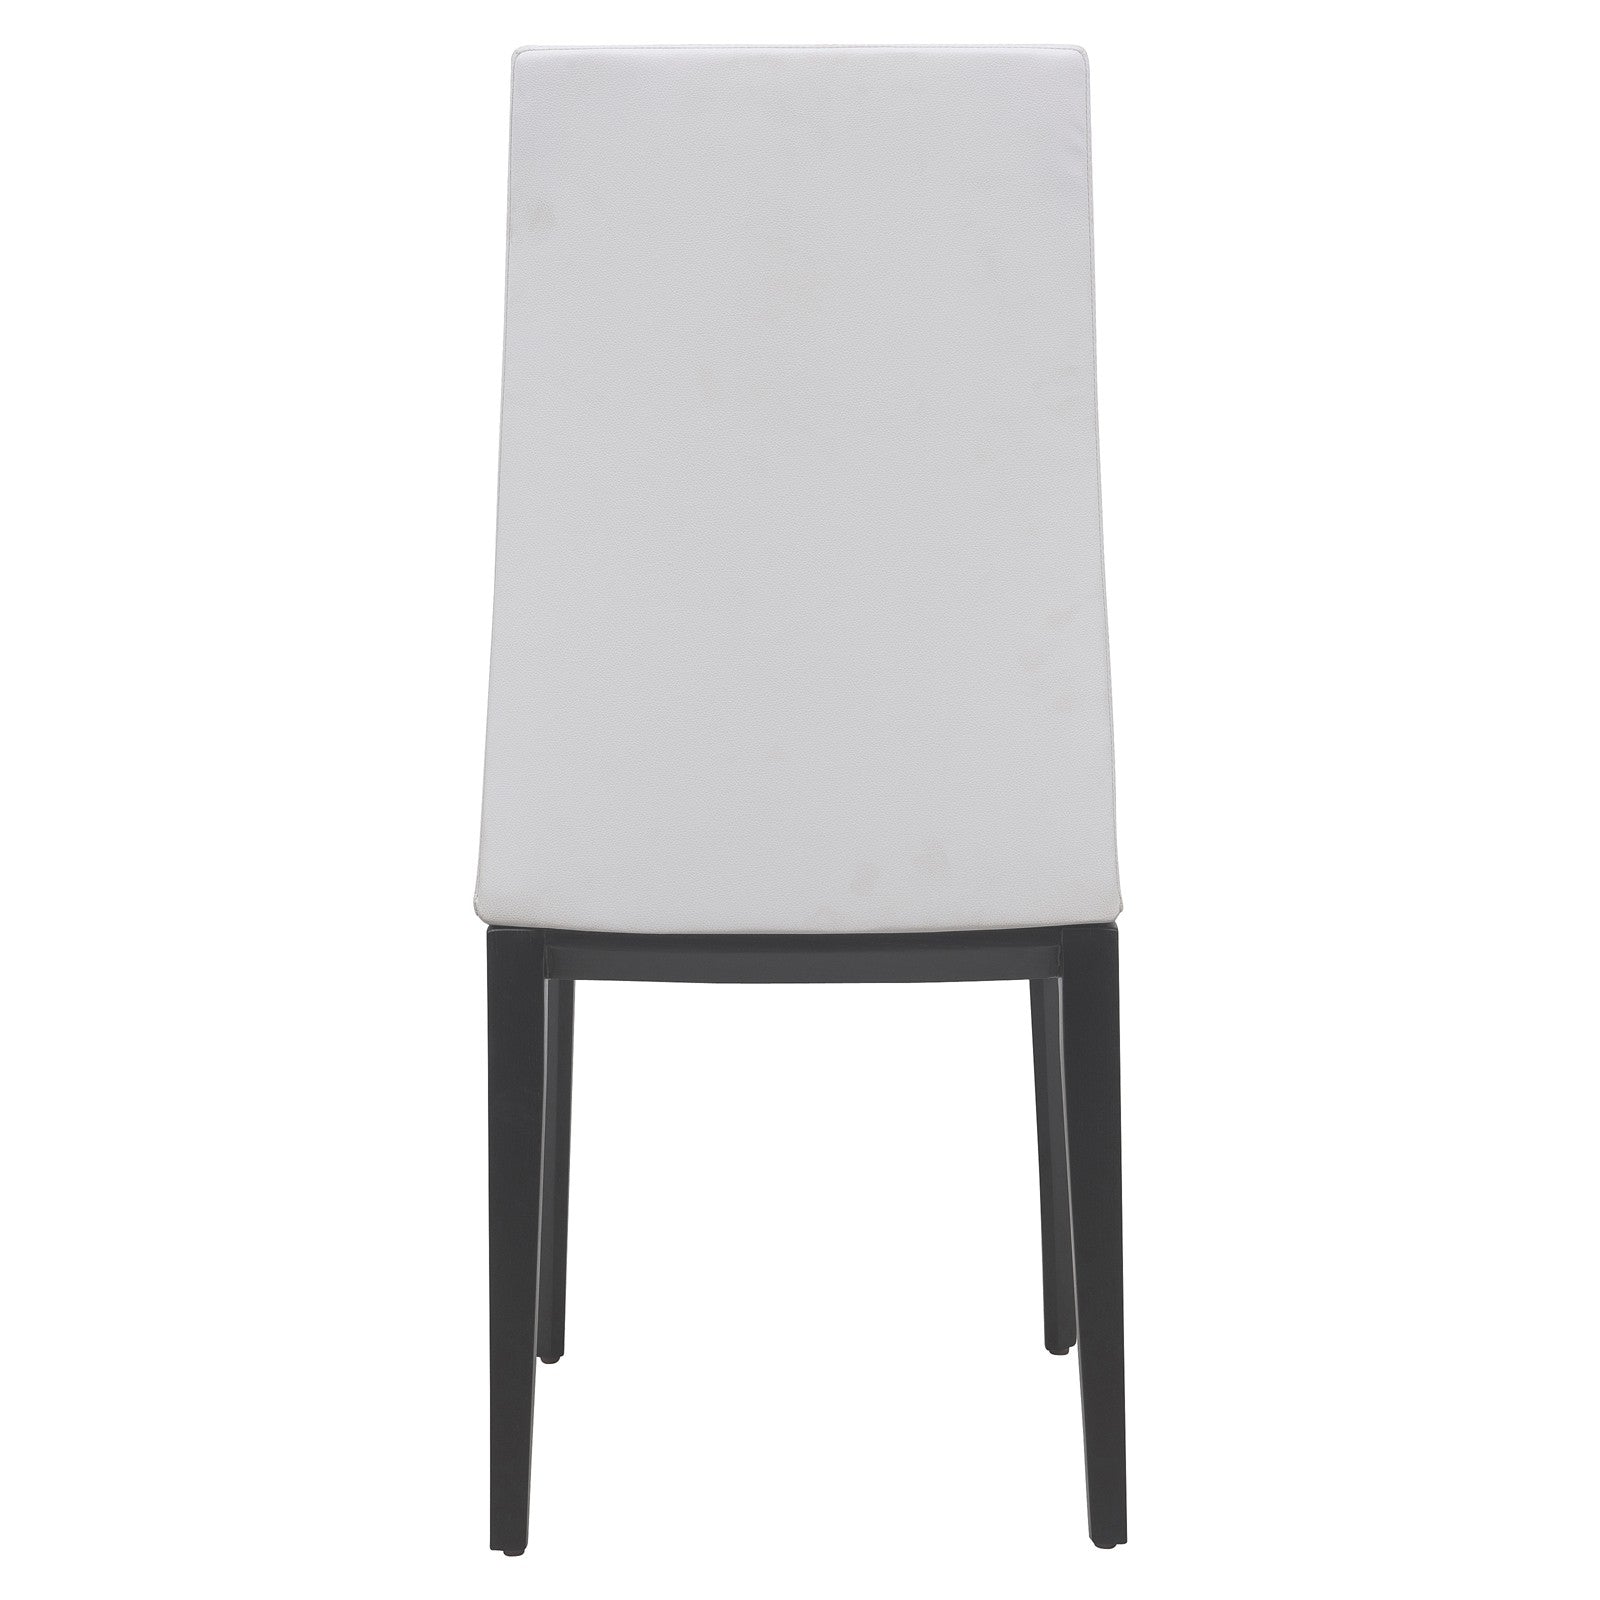 Soleil White Vinyl Leather Dining Chair - living-essentials